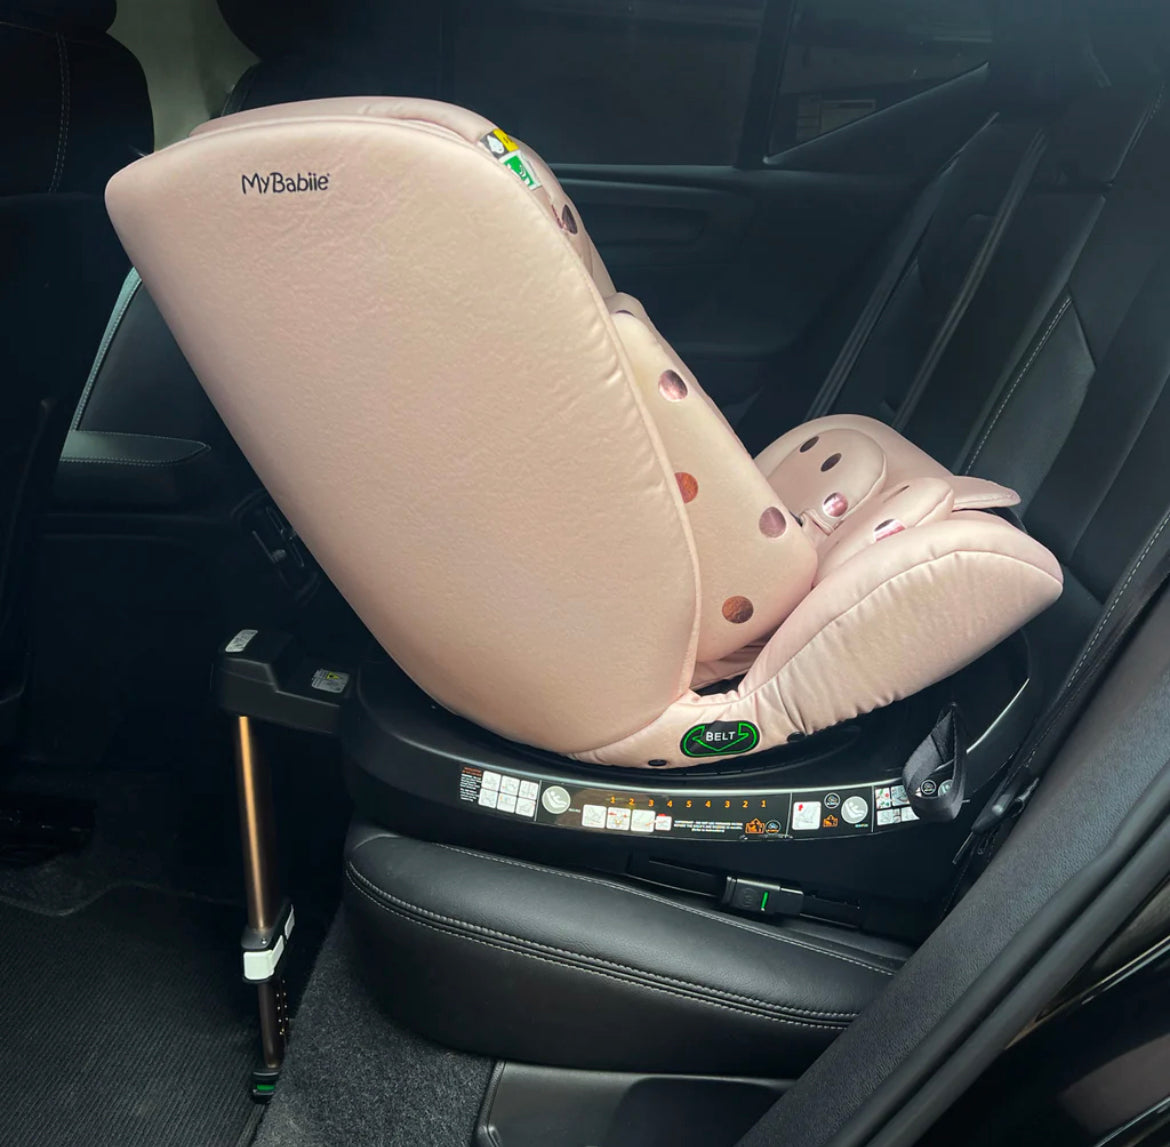 Samantha Faiers iSize Pink Polka Spin Car Seat (40-150cm)